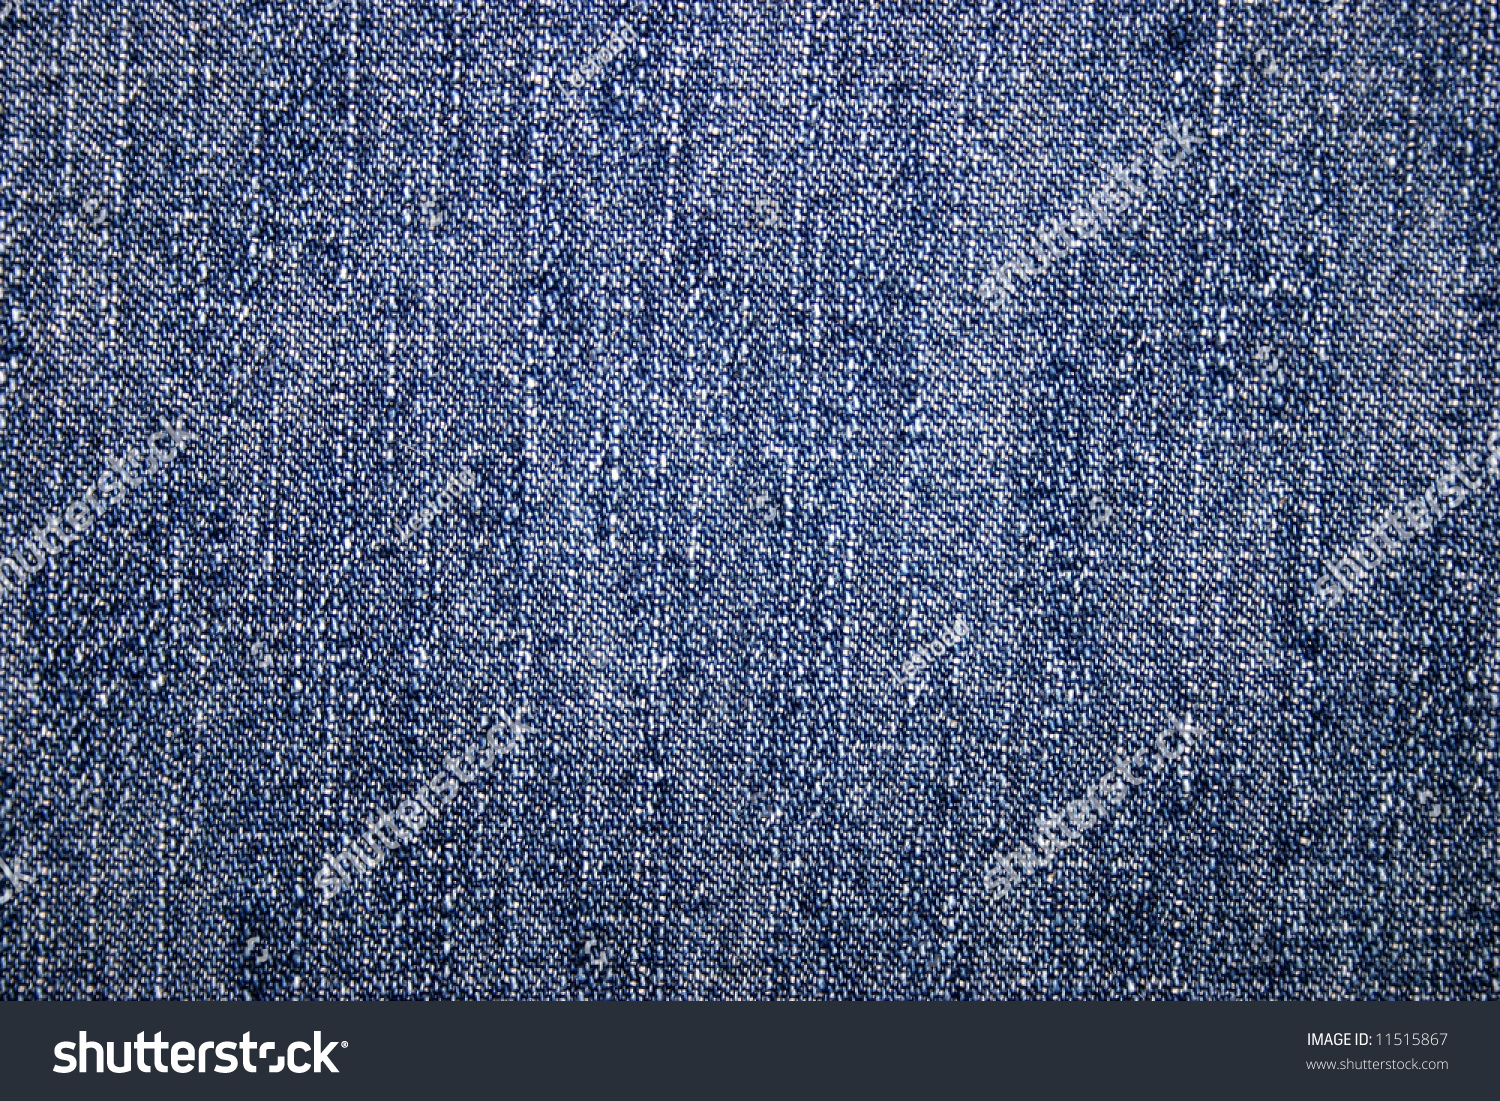 Close Abstract Background Denim Material Stock Photo 11515867 ...